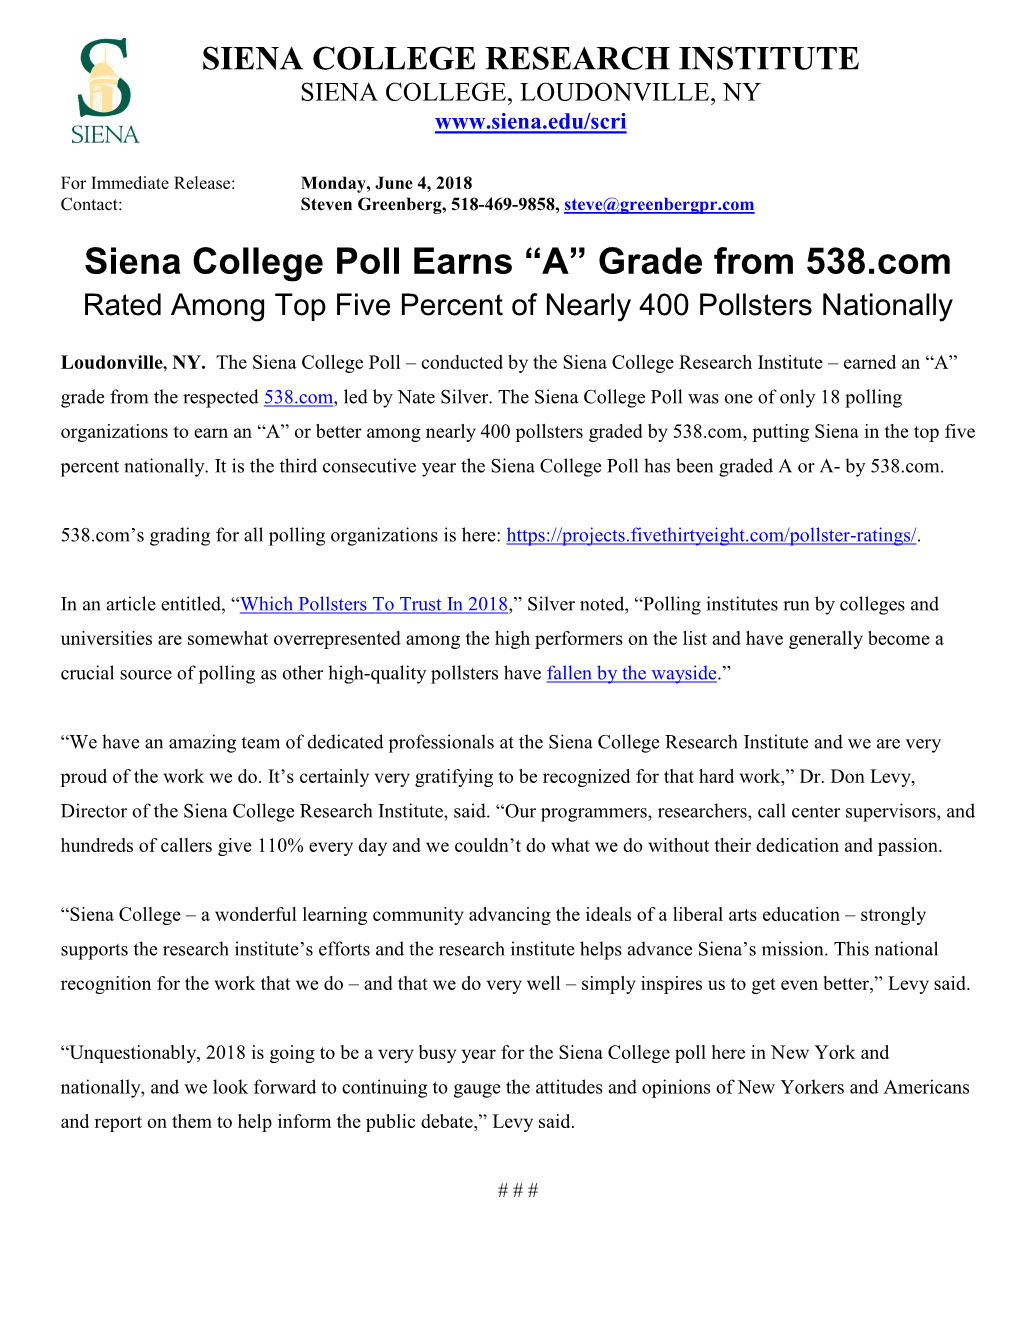 Siena College Poll Earns “A” Grade from 538.Com